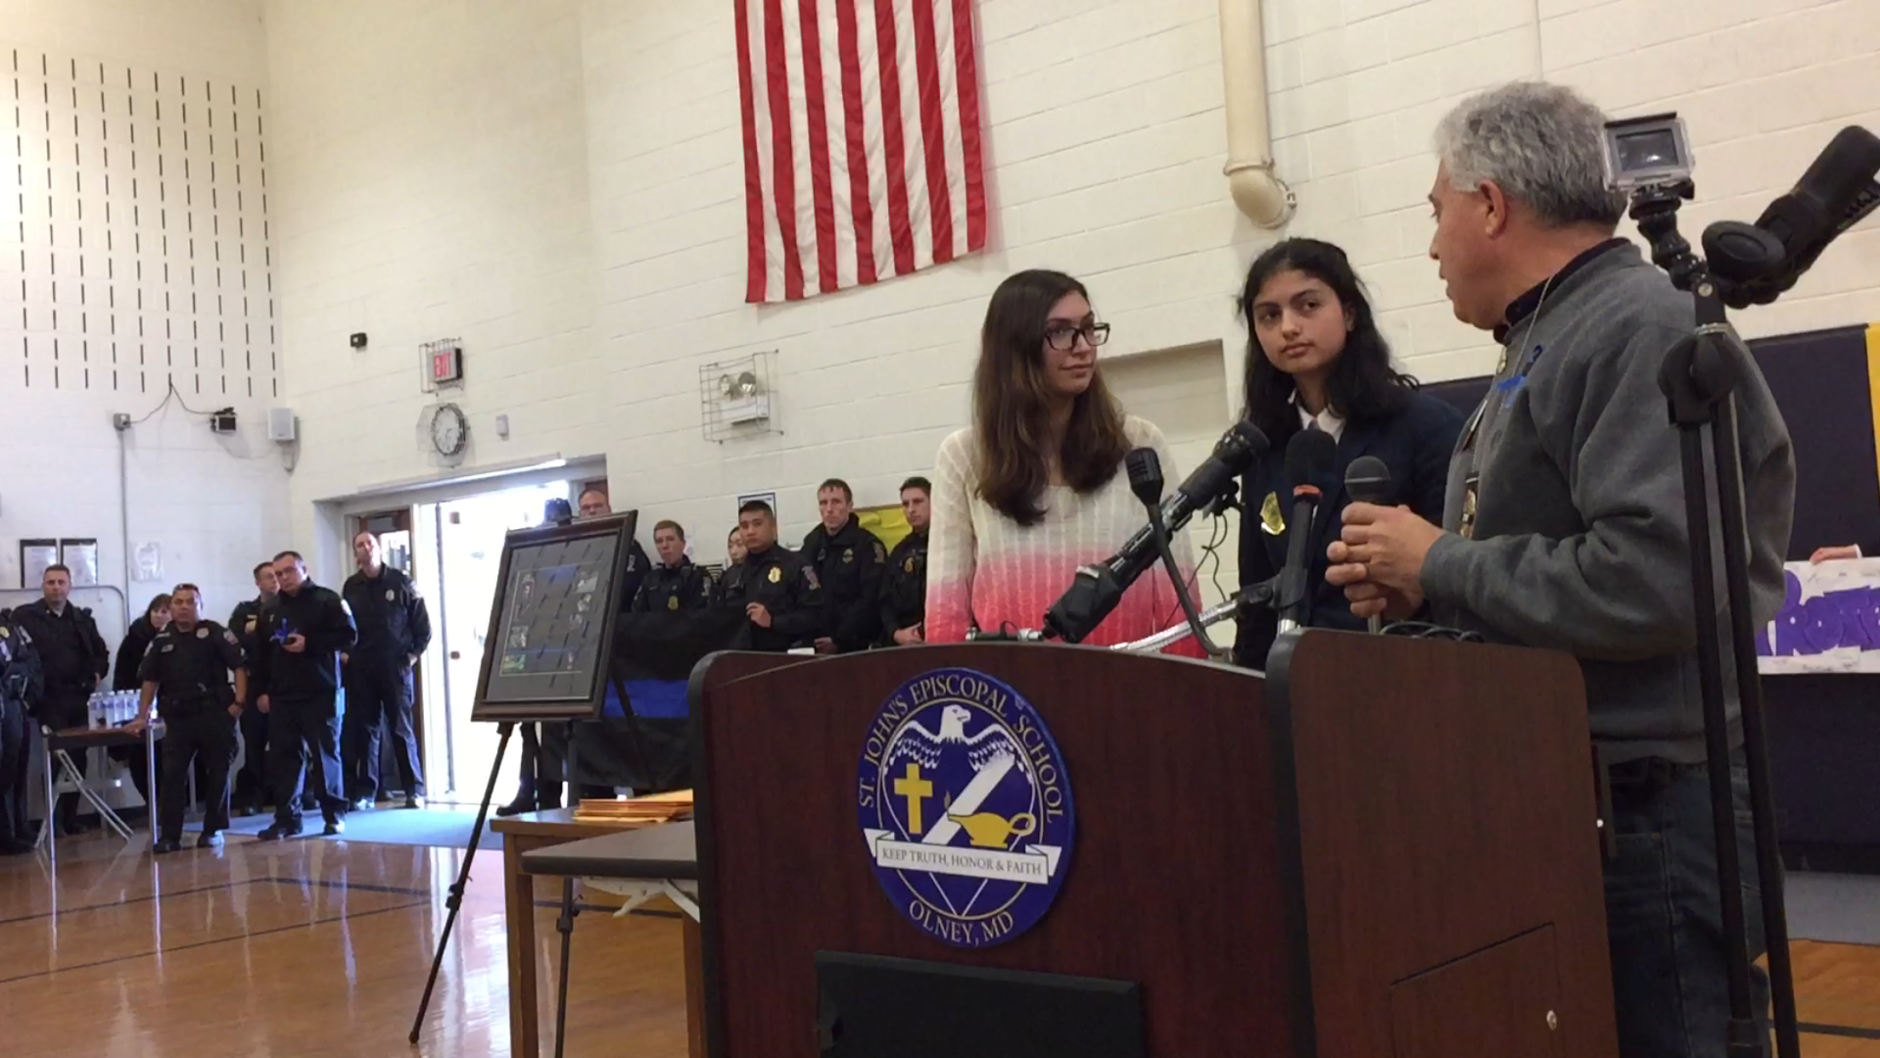 Standing with her sister Katherine-Aria Close, seventh grader Alexandra Close, center, is thanked by Rick Leotta for her poem commemorating the day she and classmates honored Leott'a son, fallen officer Noah Leotta along his funeral procession. Officers in background also attended the ceremony in which Close and her school were given a plaque of appreciation by Leotta and the police department.(WTOP/Kristi King)